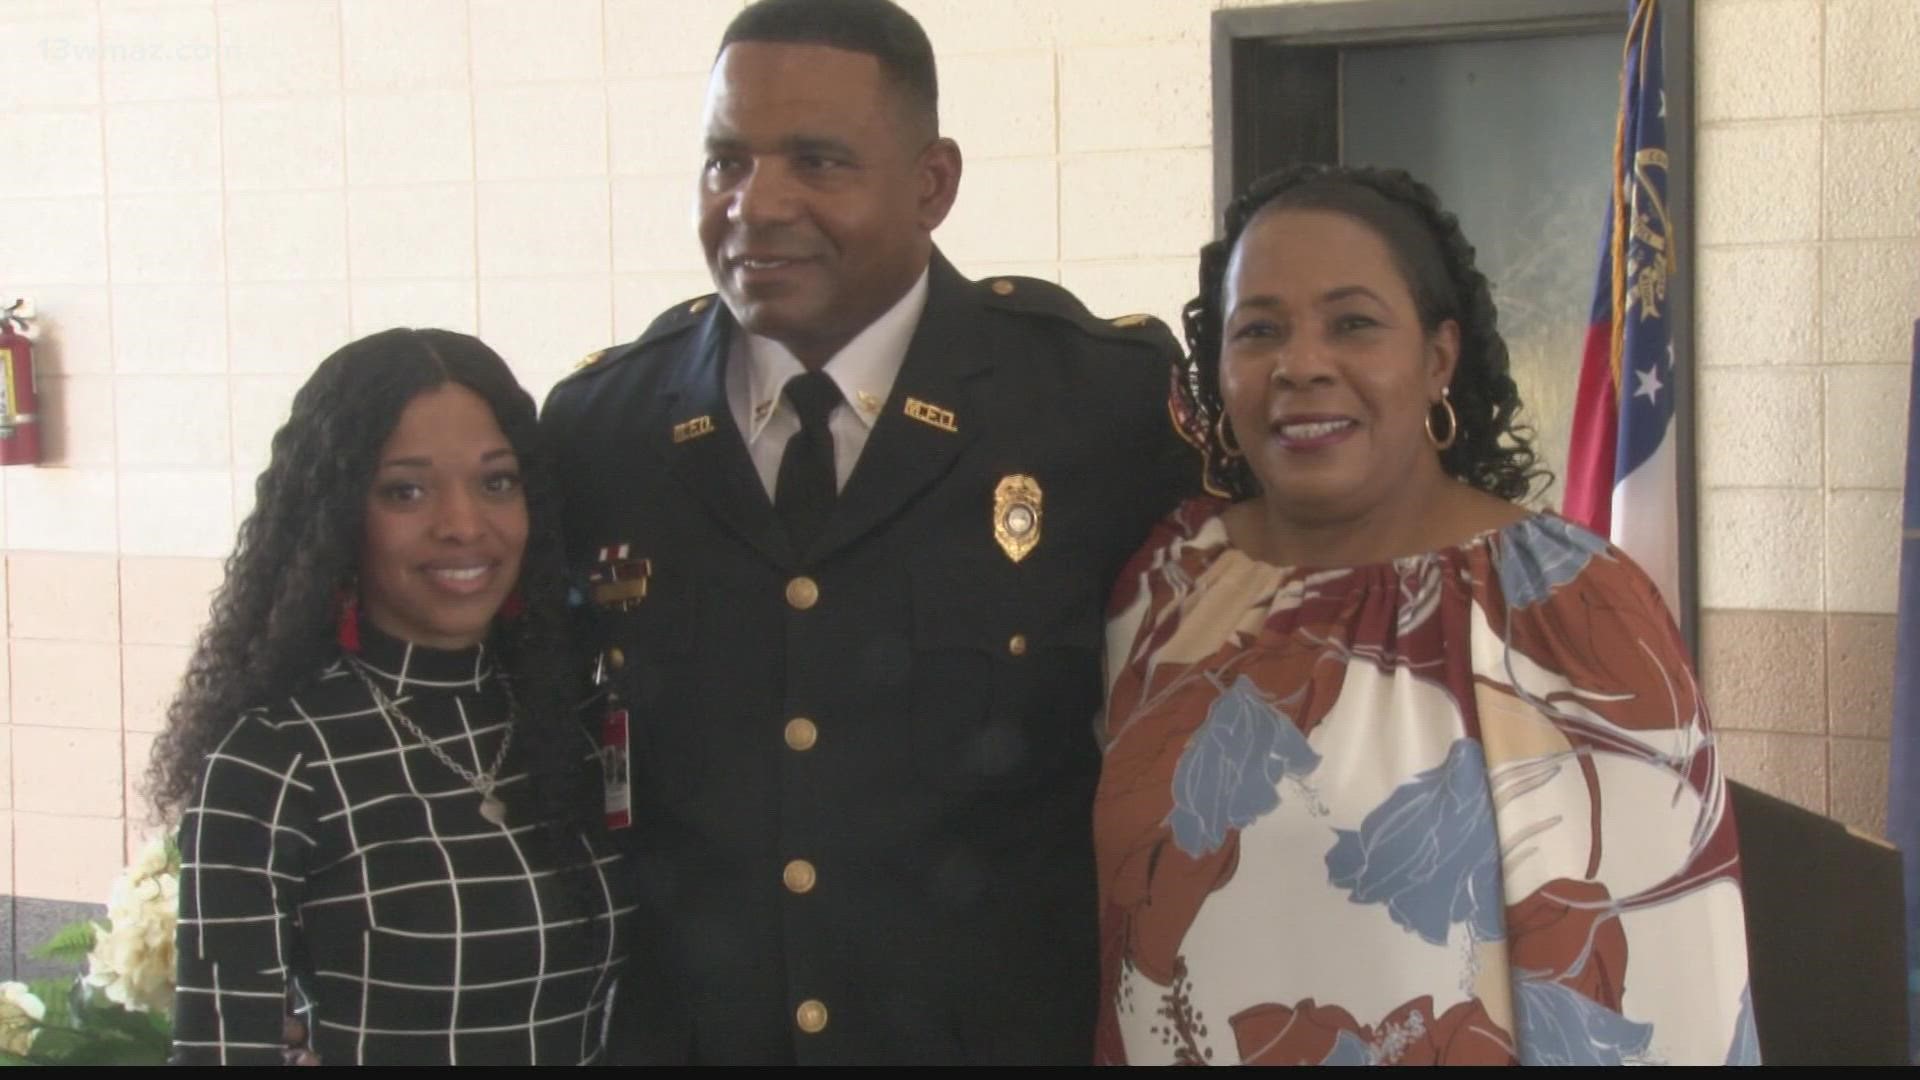 Reco Stephens was promoted to the position after over a decade as the training chief.